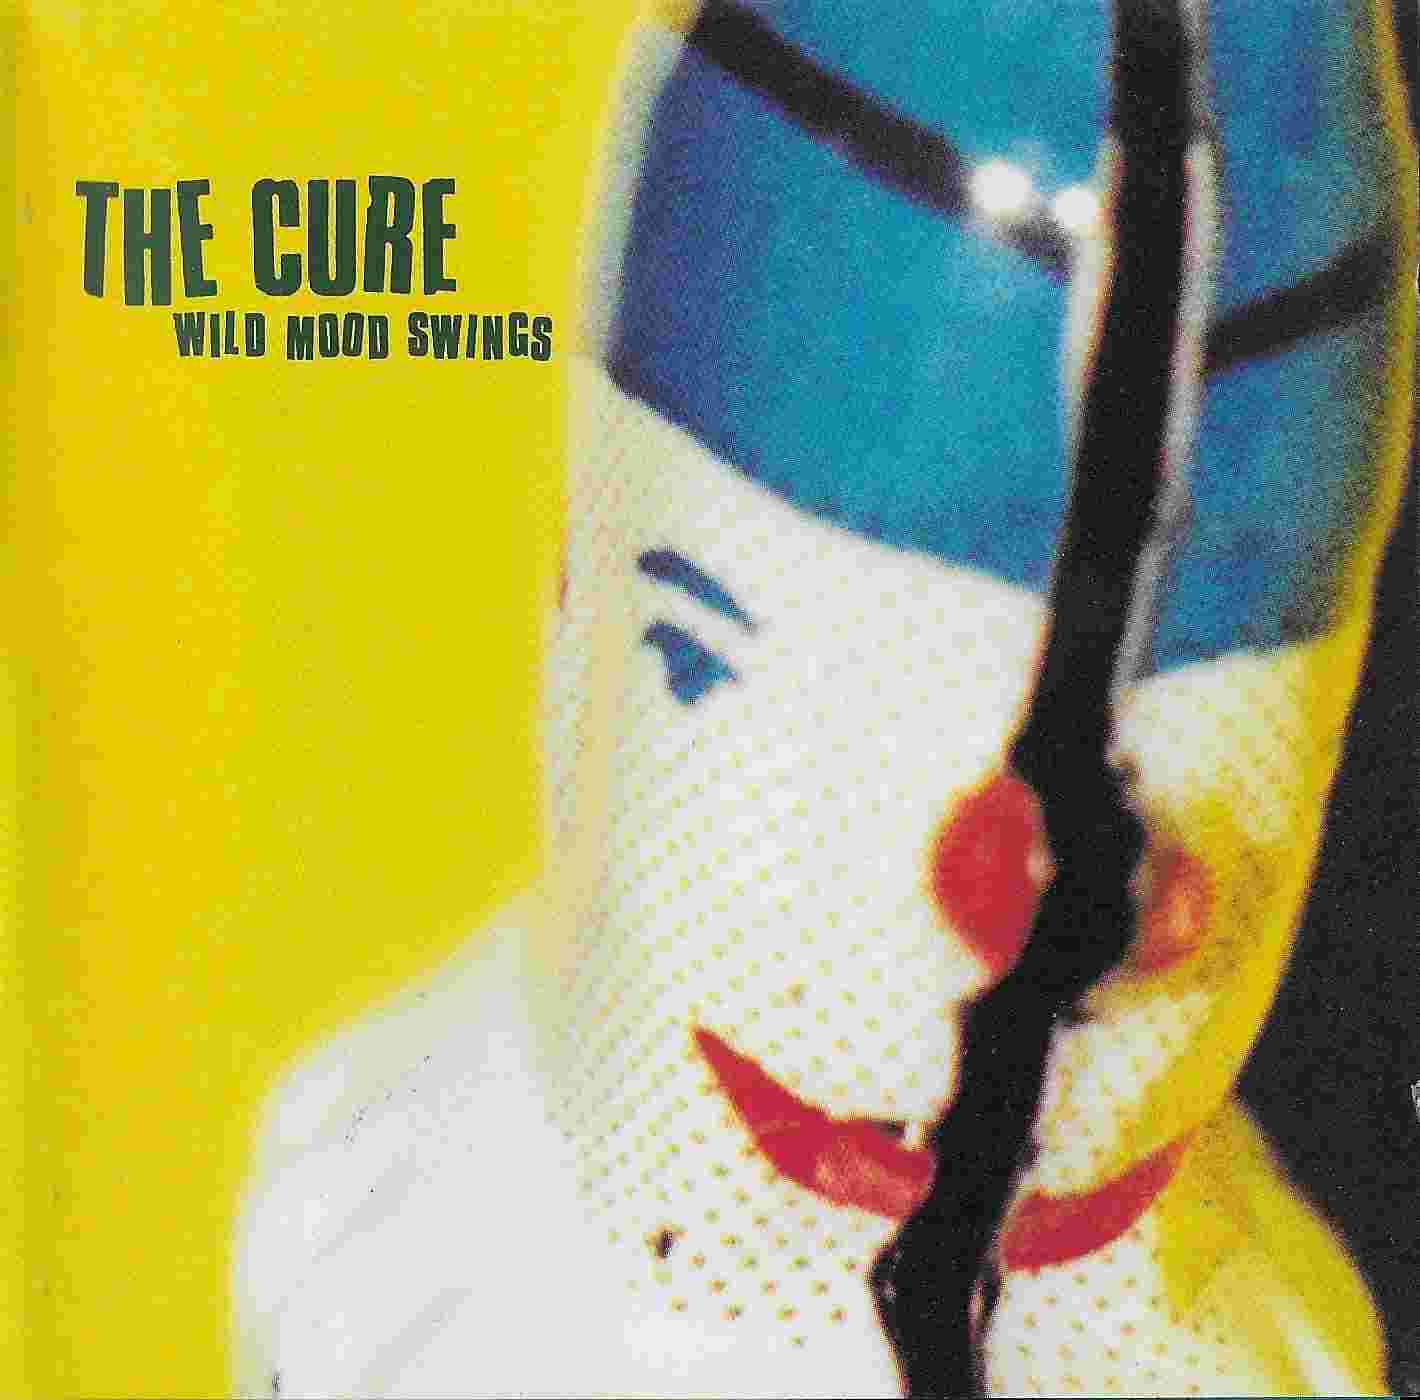 Picture of FIXCD 28 Wild mood swings by artist The Cure